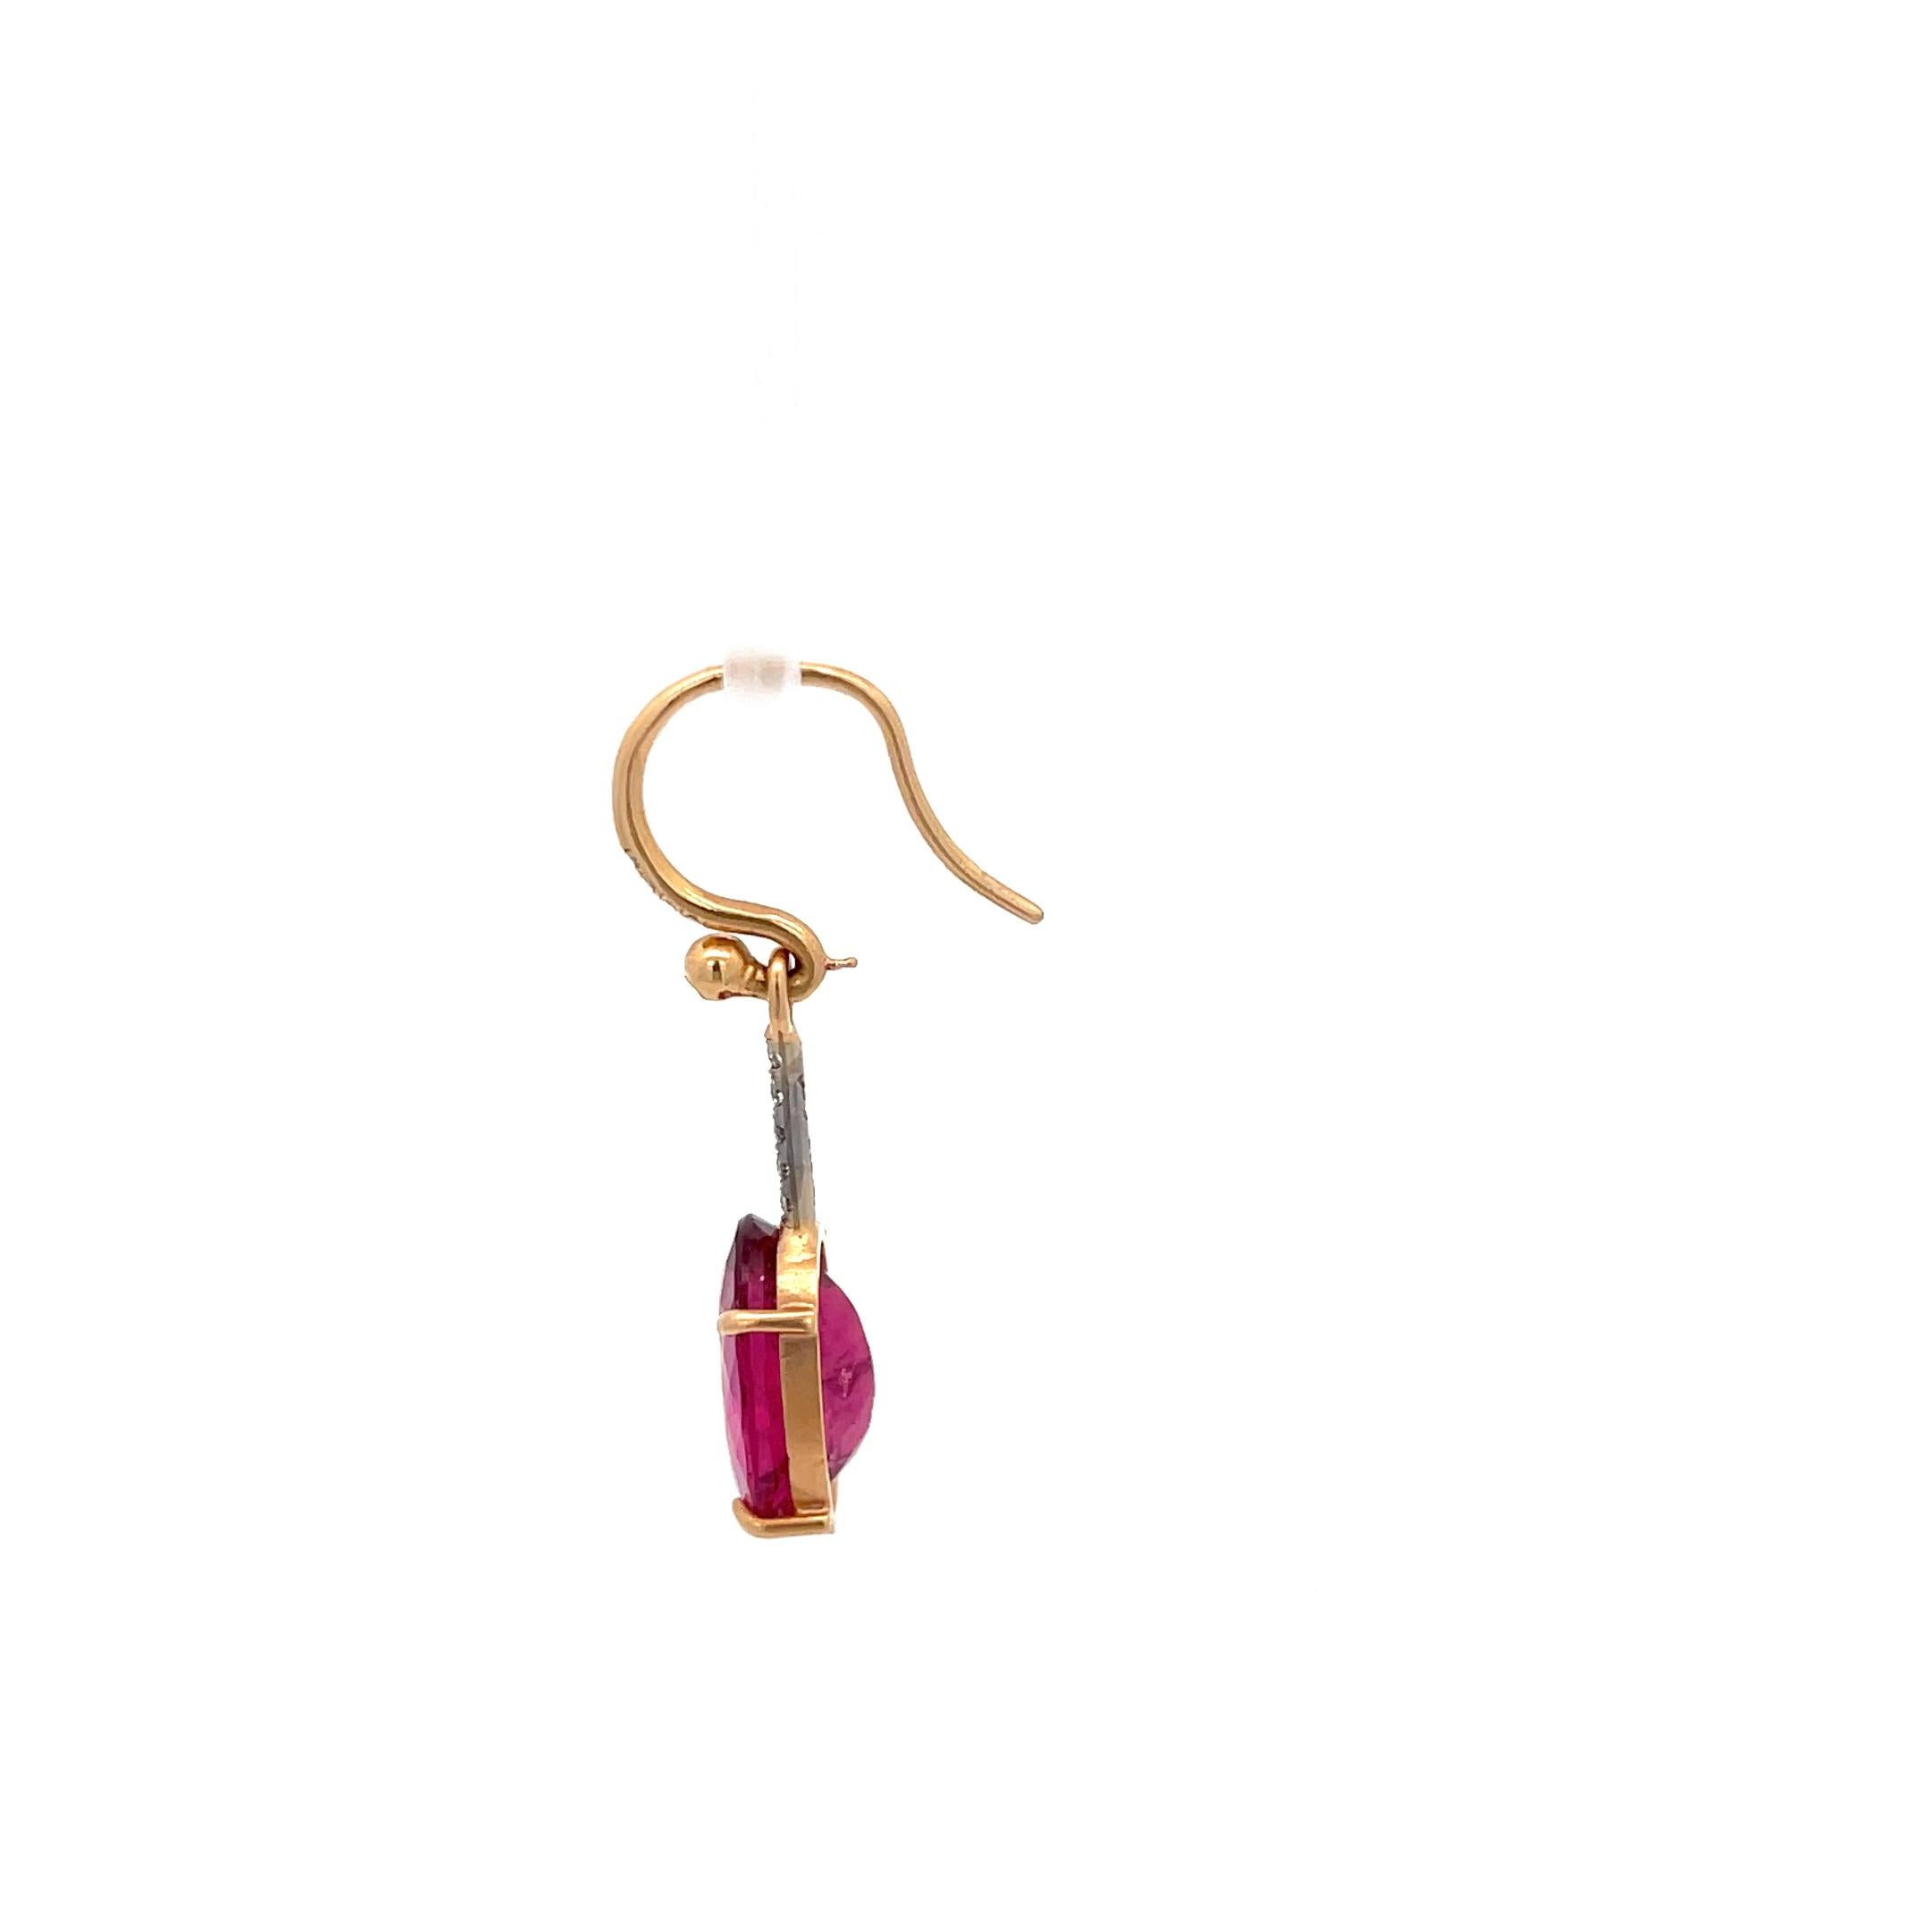 Contemporary Irene Neuwirth Diamond and Tourmaline Single Earring 18K Rose Gold For Sale